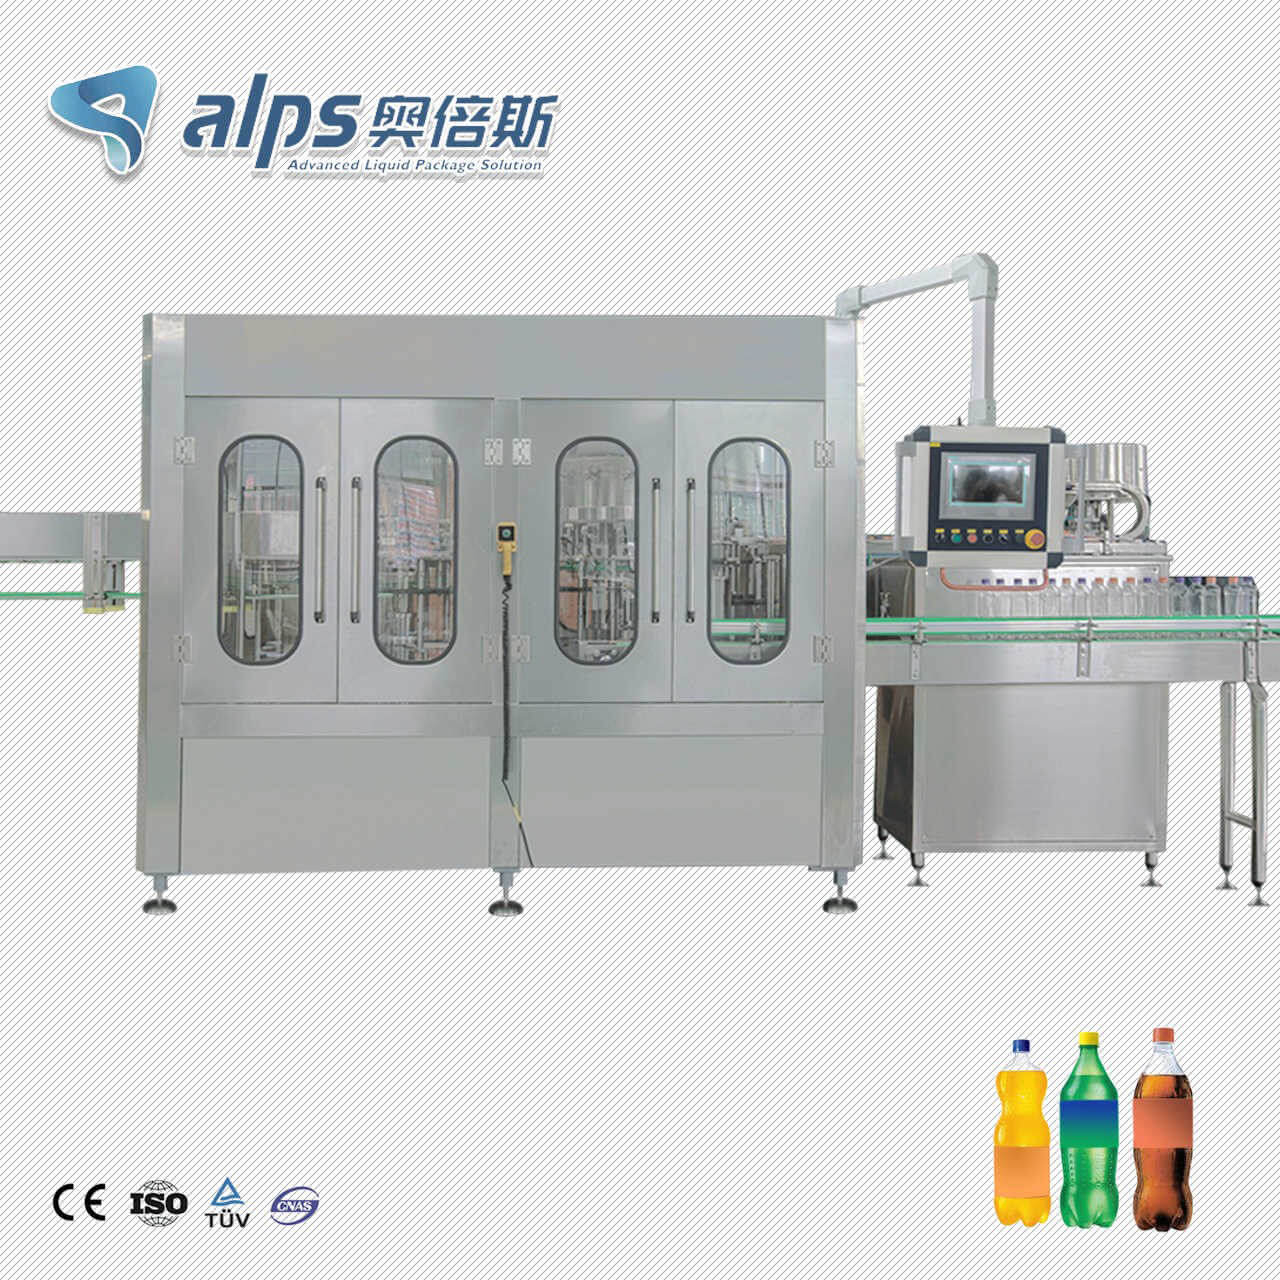 Beverage Filling Machine: Ensuring Strict Hygiene Standards and Quality Control in the Beverage Filling Process